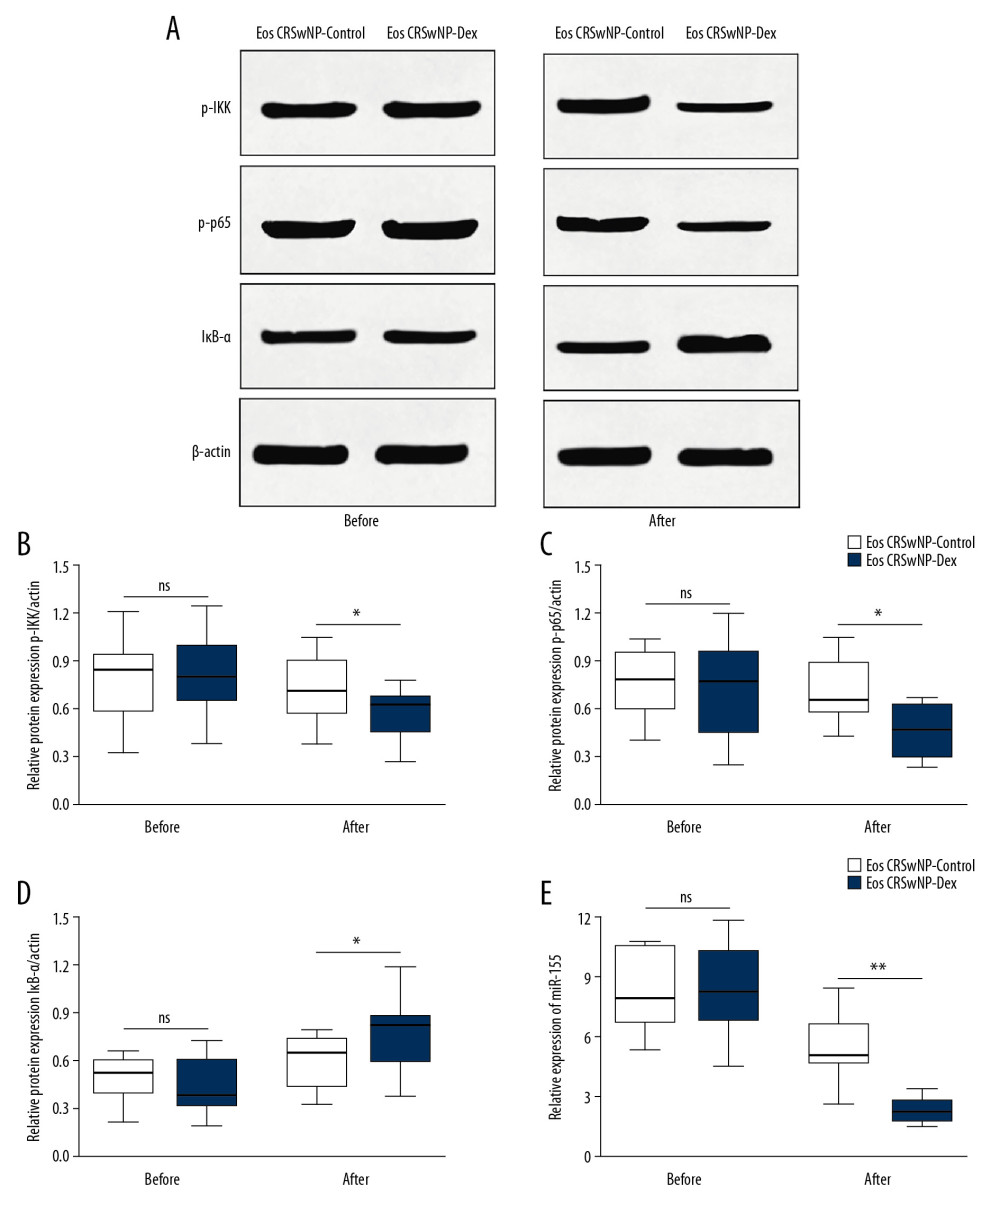 Expression of NF-κB/miR-155 in Eos CRSwNP patients with or without DEX treatment. (A) Western blot analysis of p-IKK, p-p65, and IκB-α in Eos CRSwNP-control and Eos CRSwNP-DEX group. (B–D) Statistical analysis displayed after DEX treatment, the expression of p-IKK and p-p65 were significantly decreased while the expression of IκB-α was significantly increased in Eos CRSwNP patients. (E) After DEX treatment, the expression of miR-155 was also decreased in Eos CRSwNP patients. NF-κB – nuclear factor κB; Eos CRSwNP – eosinophilic chronic rhinosinusitis with nasal polyps; DEX – dexamethasone.